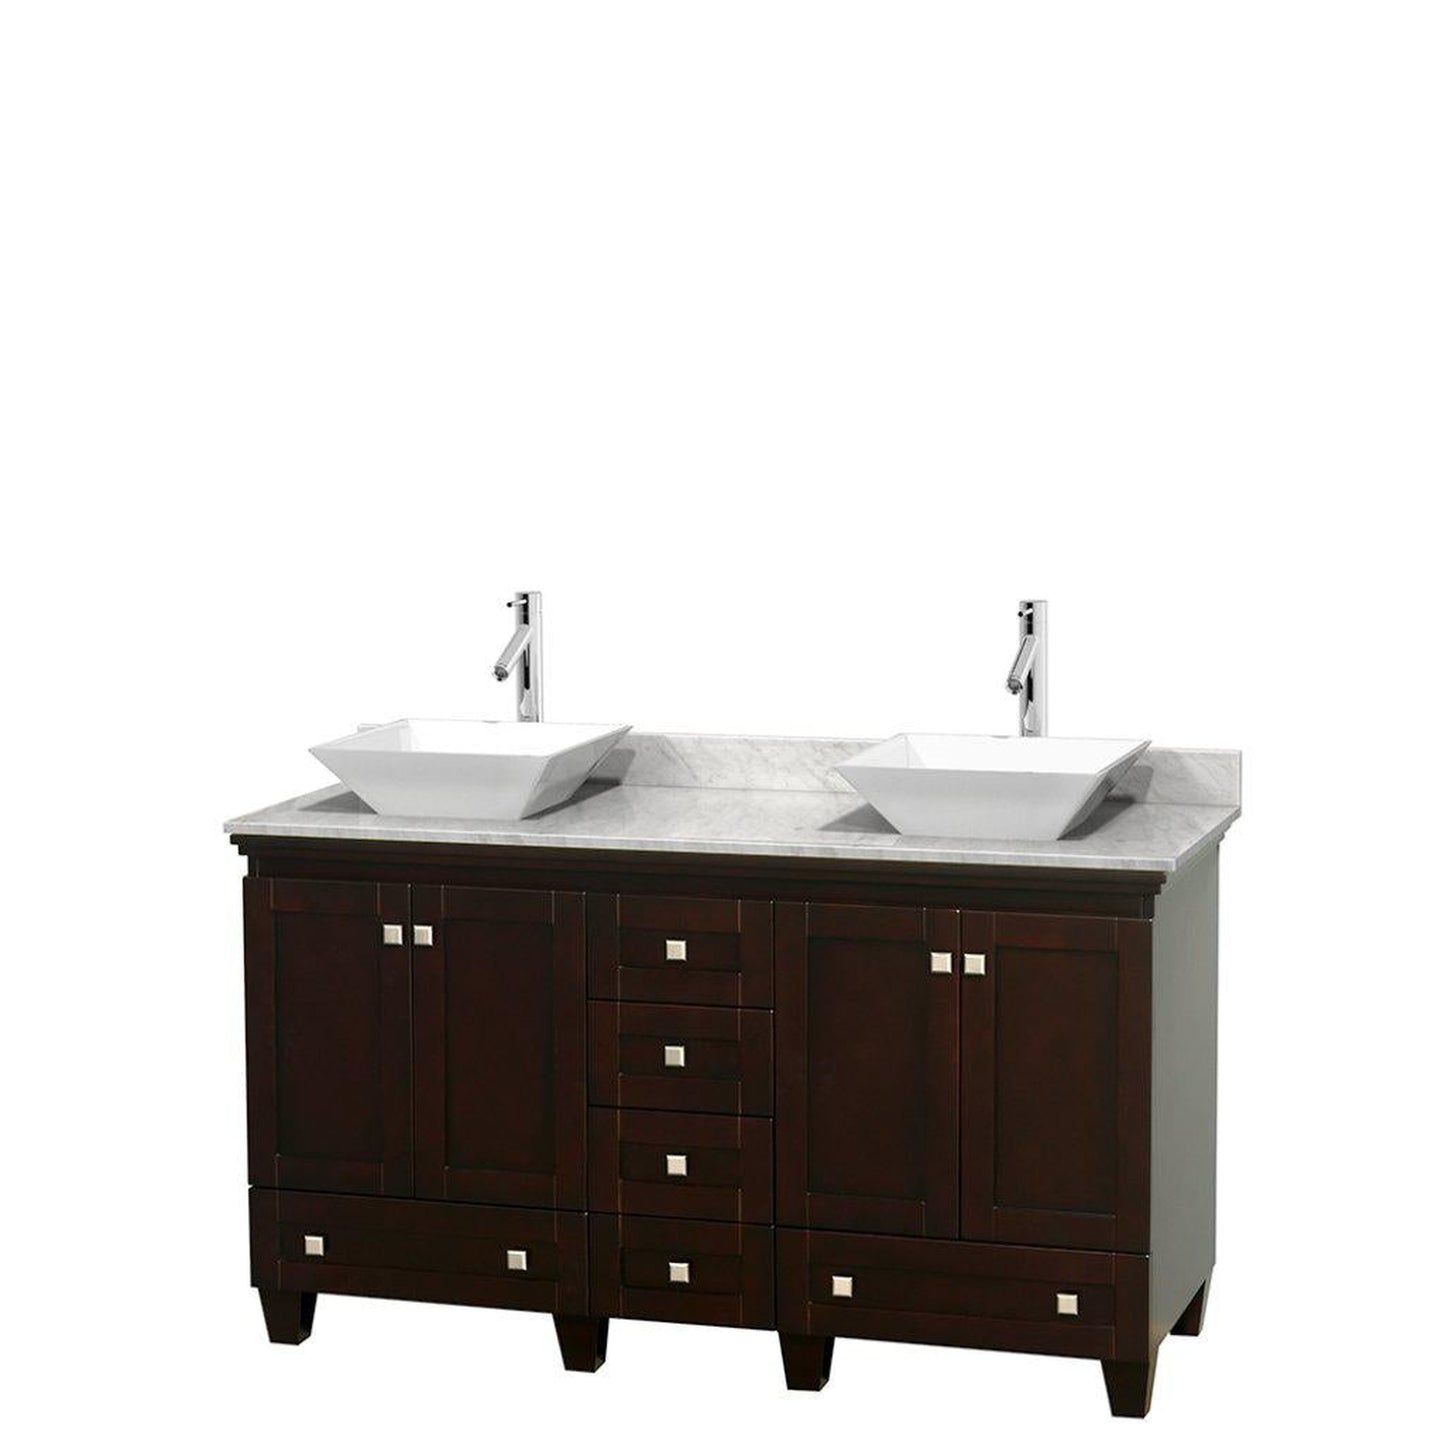 Wyndham Collection Acclaim 60" Double Bathroom Espresso Vanity With White Carrara Marble Countertop And Pyra White Sinks